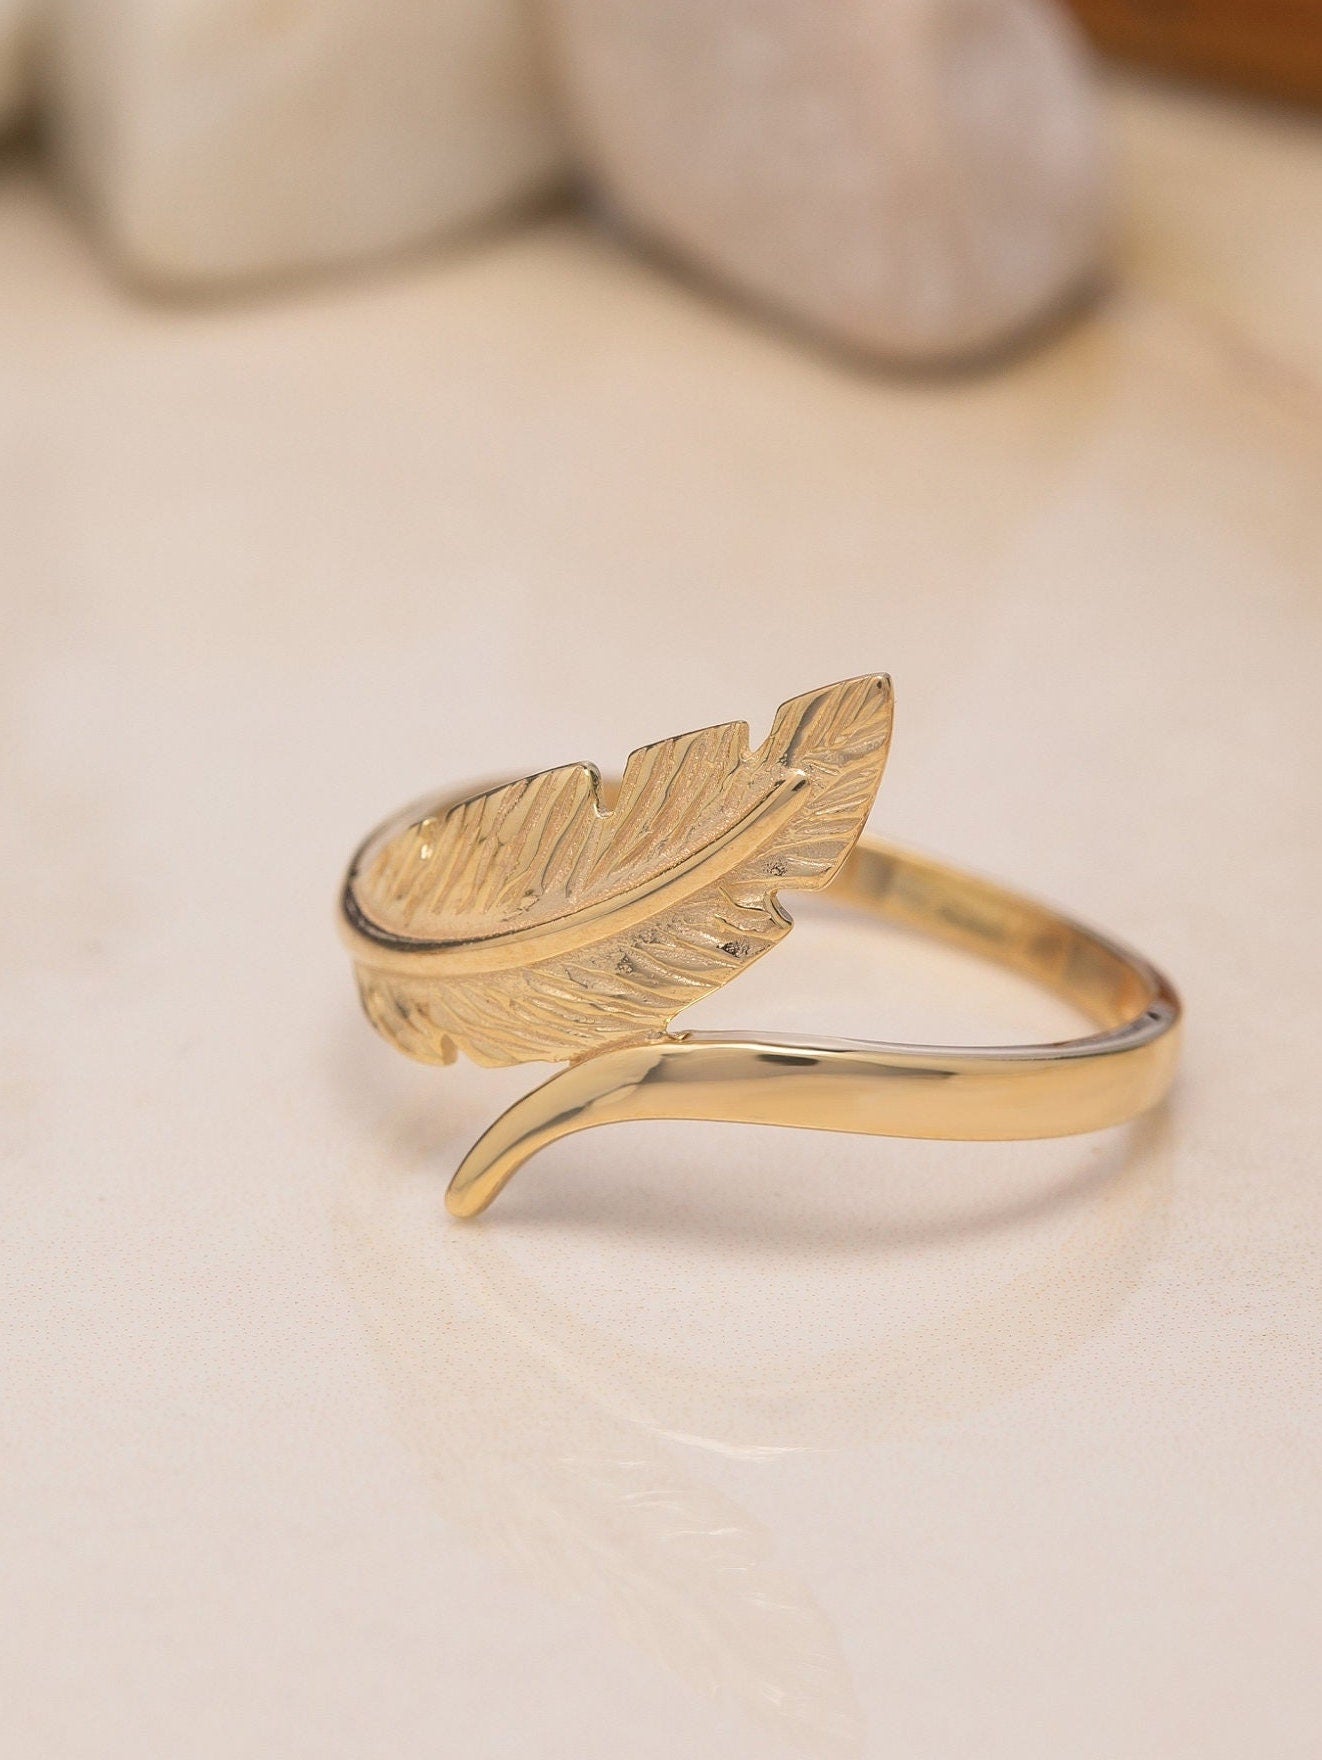 14K Solid Gold Leaf Ring - 925 Sterling Silver Leaf Ring - Minimalist Leaf Ring -Gift For Mother Day- Mother Day Jewelry - Gift for Her